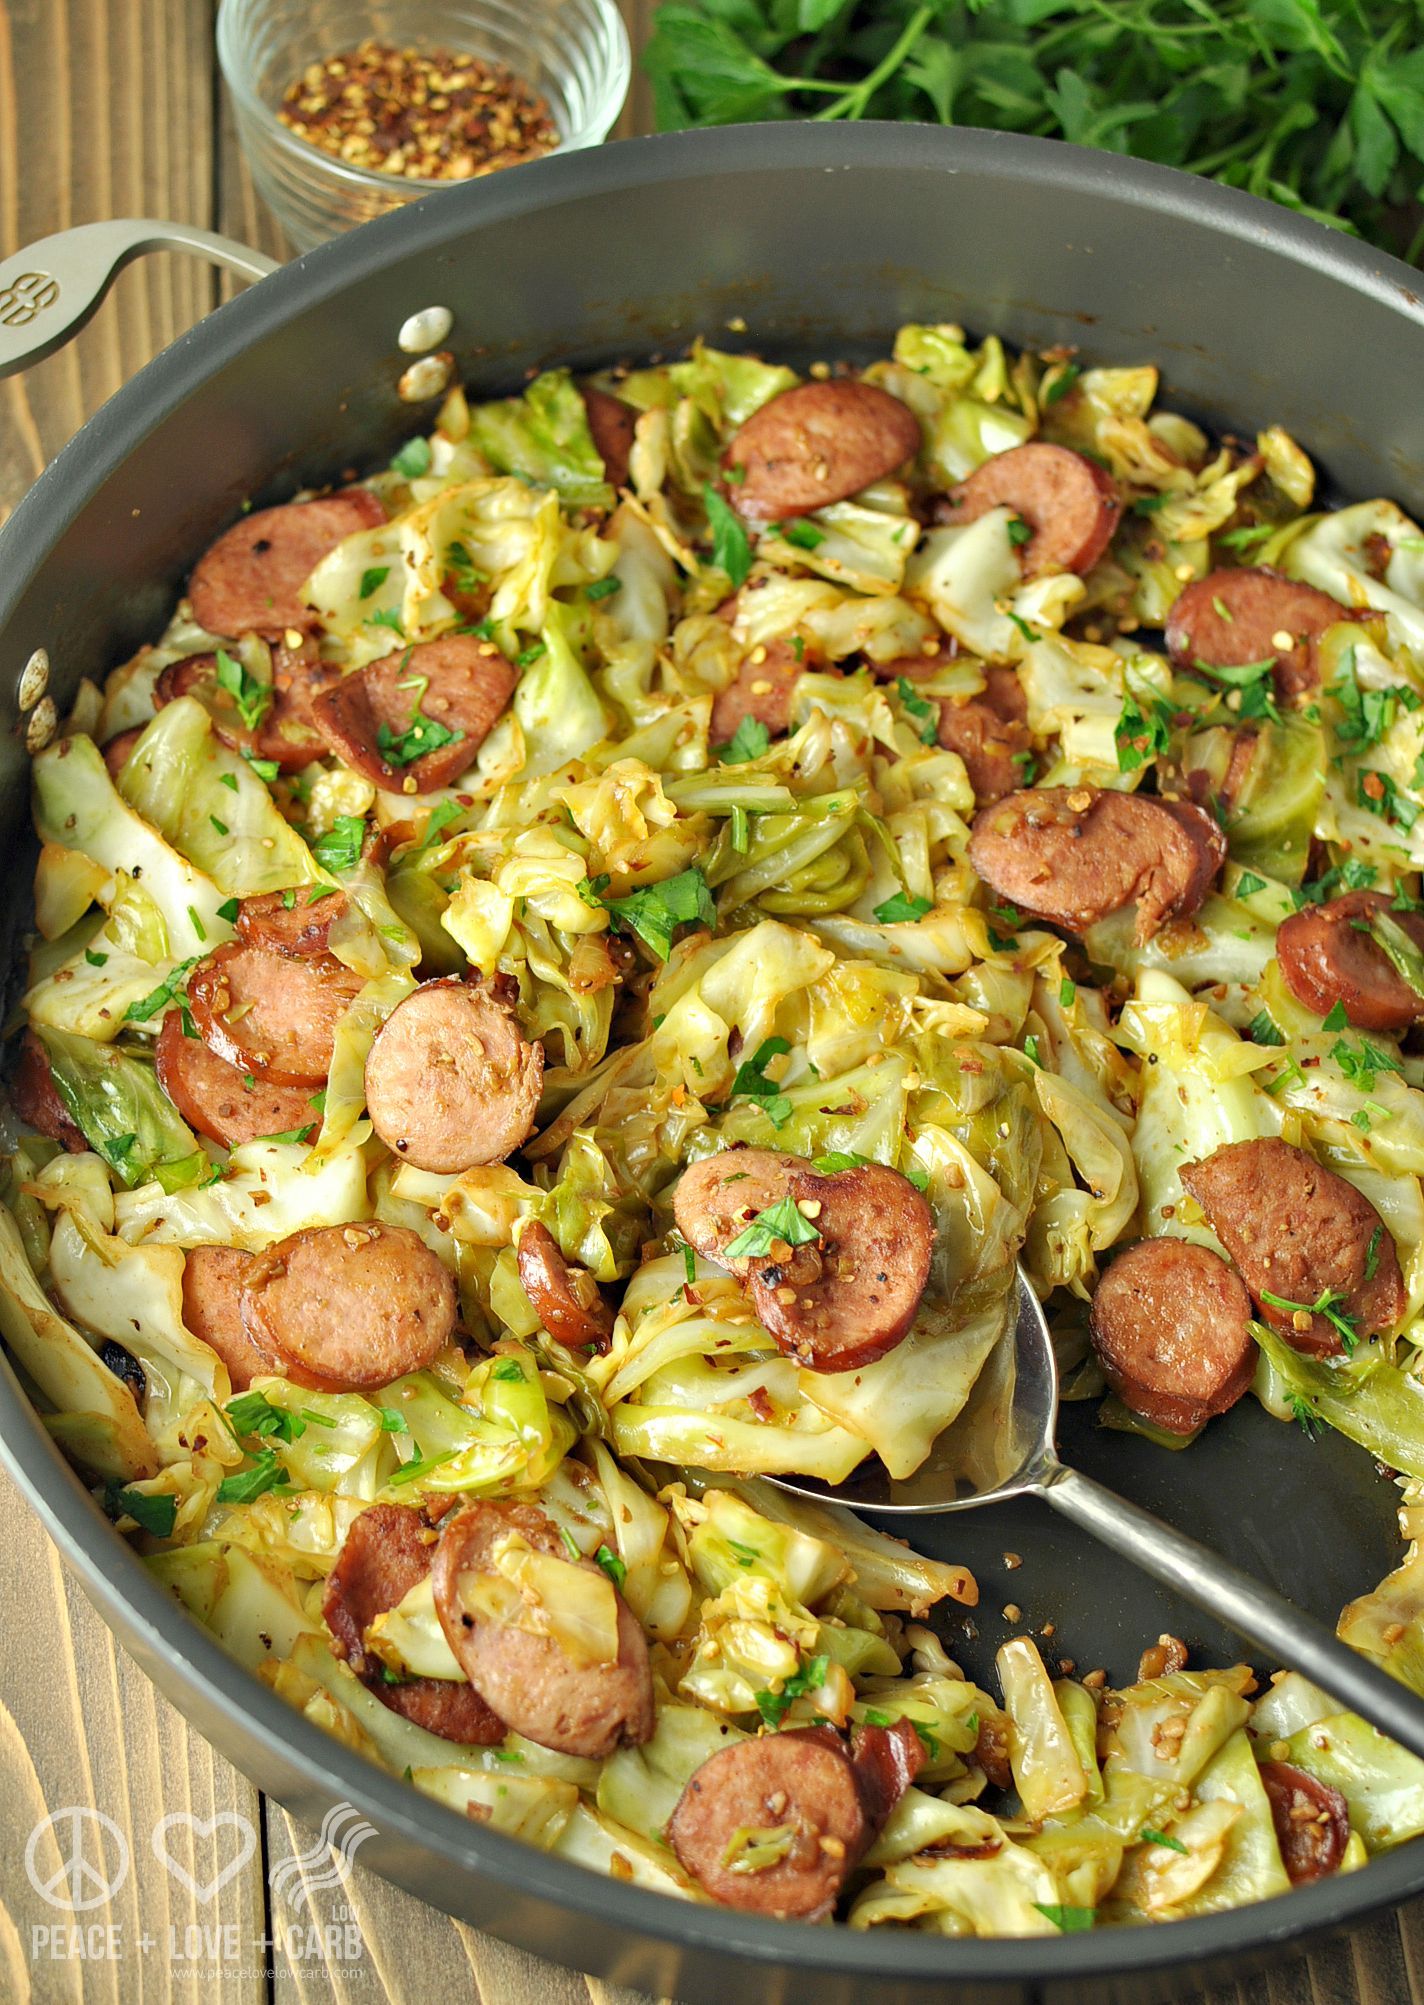 Fried Cabbage with Kielbasa – Low Carb and Gluten Free | Peace Love and Low Carb